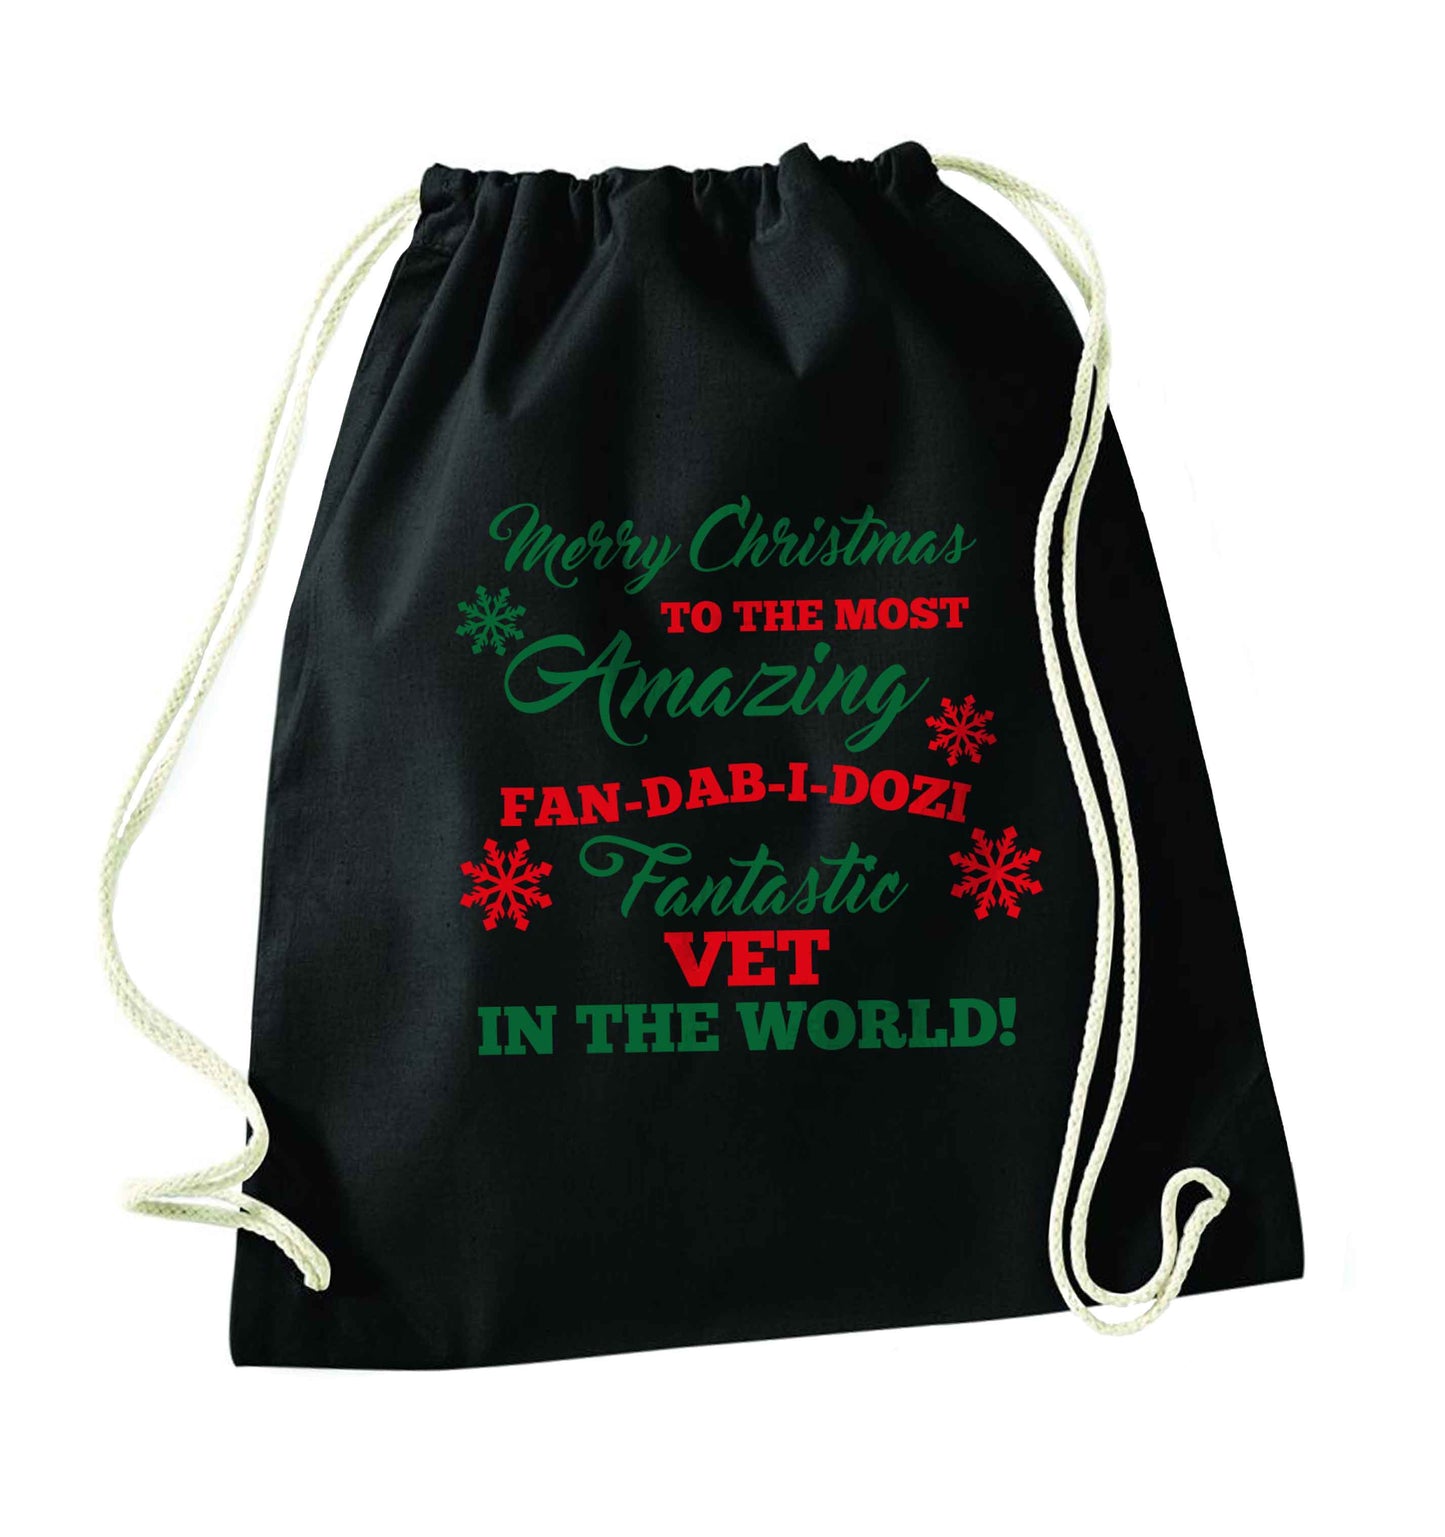 Merry Christmas to the most amazing vet in the world! black drawstring bag